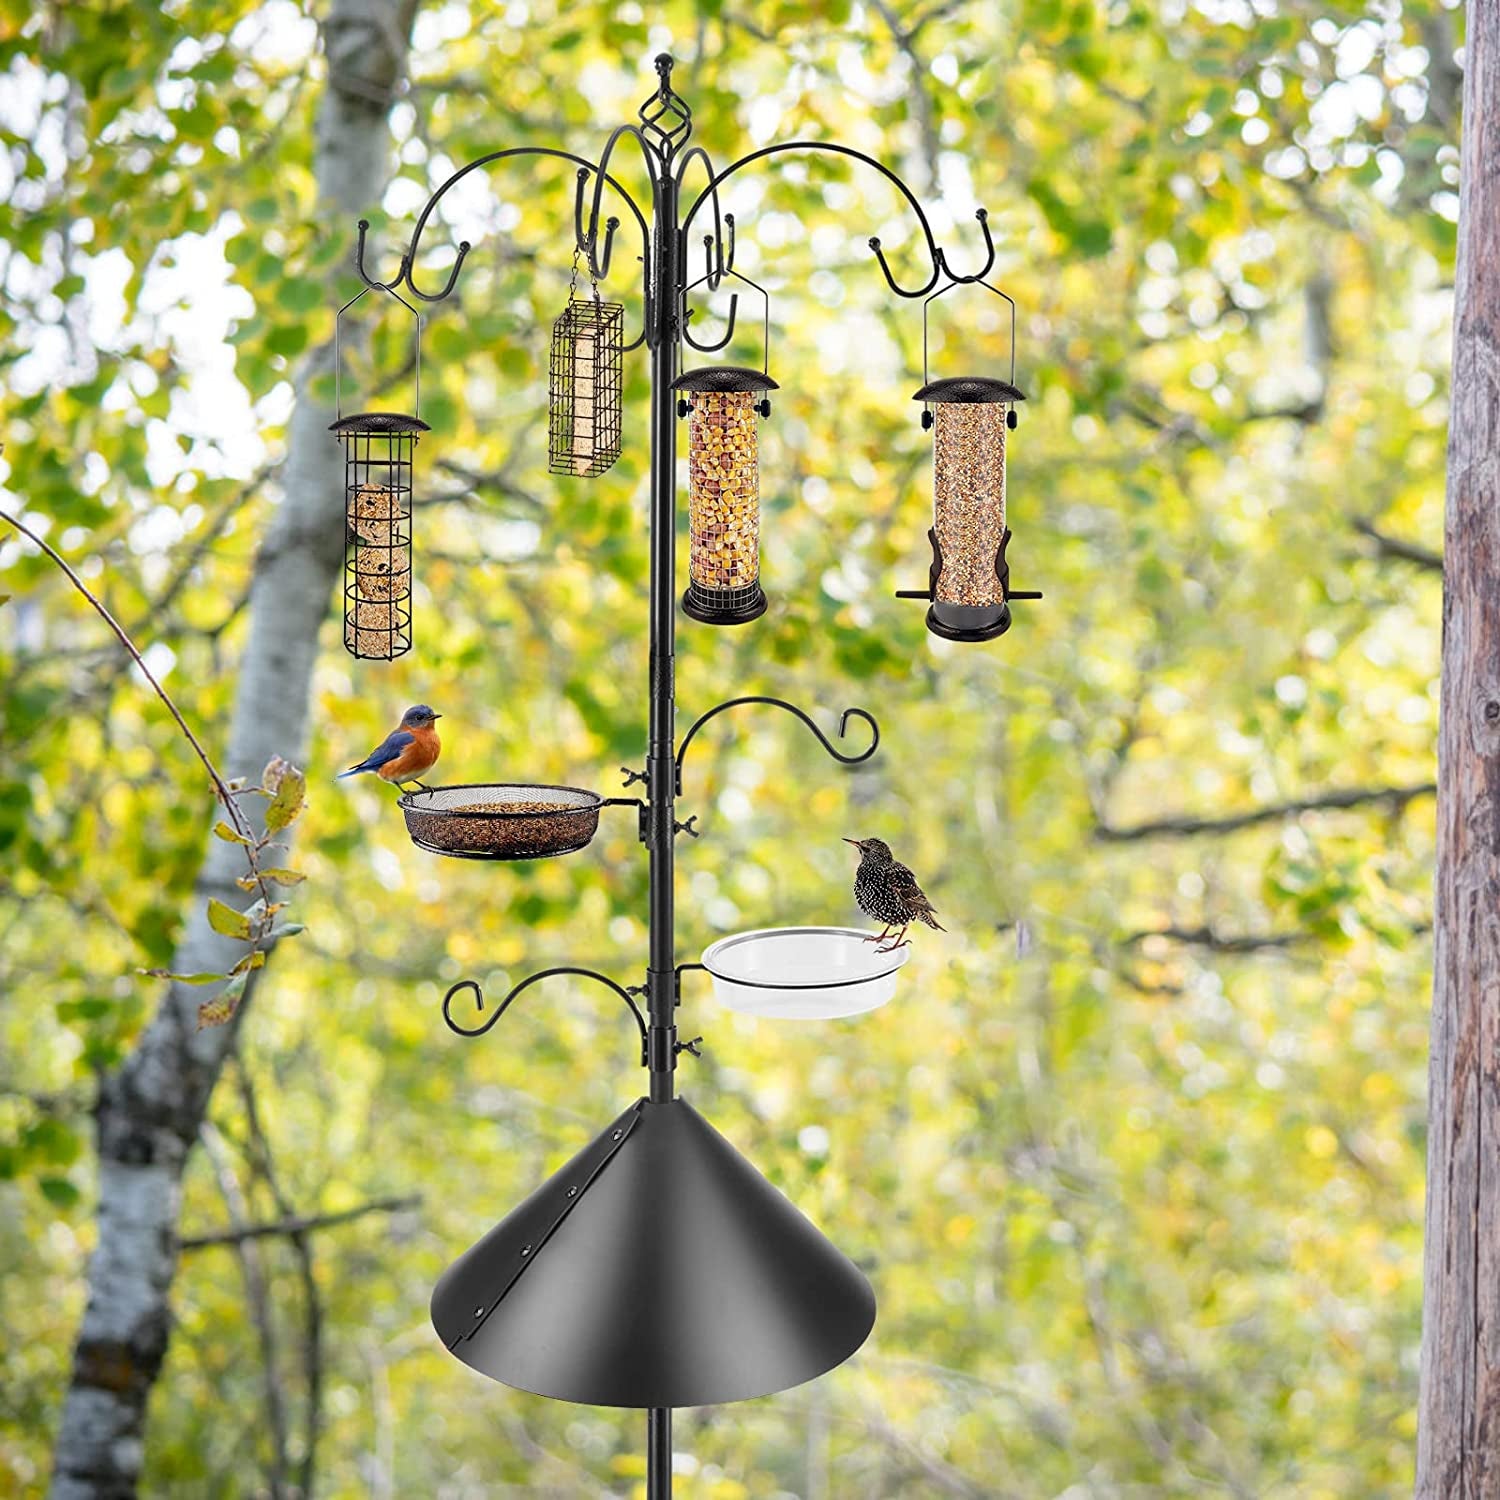 Bird Feeder Station Bird Feeding Station Kit Bird Feeder Pole Wild Bird Feeder Kit with Squirrel Baffle and Suet Cage Mesh Tray Fruit Hook Double W Hook for Attracting Wild Birds (15"L X 3"W X 6"H)